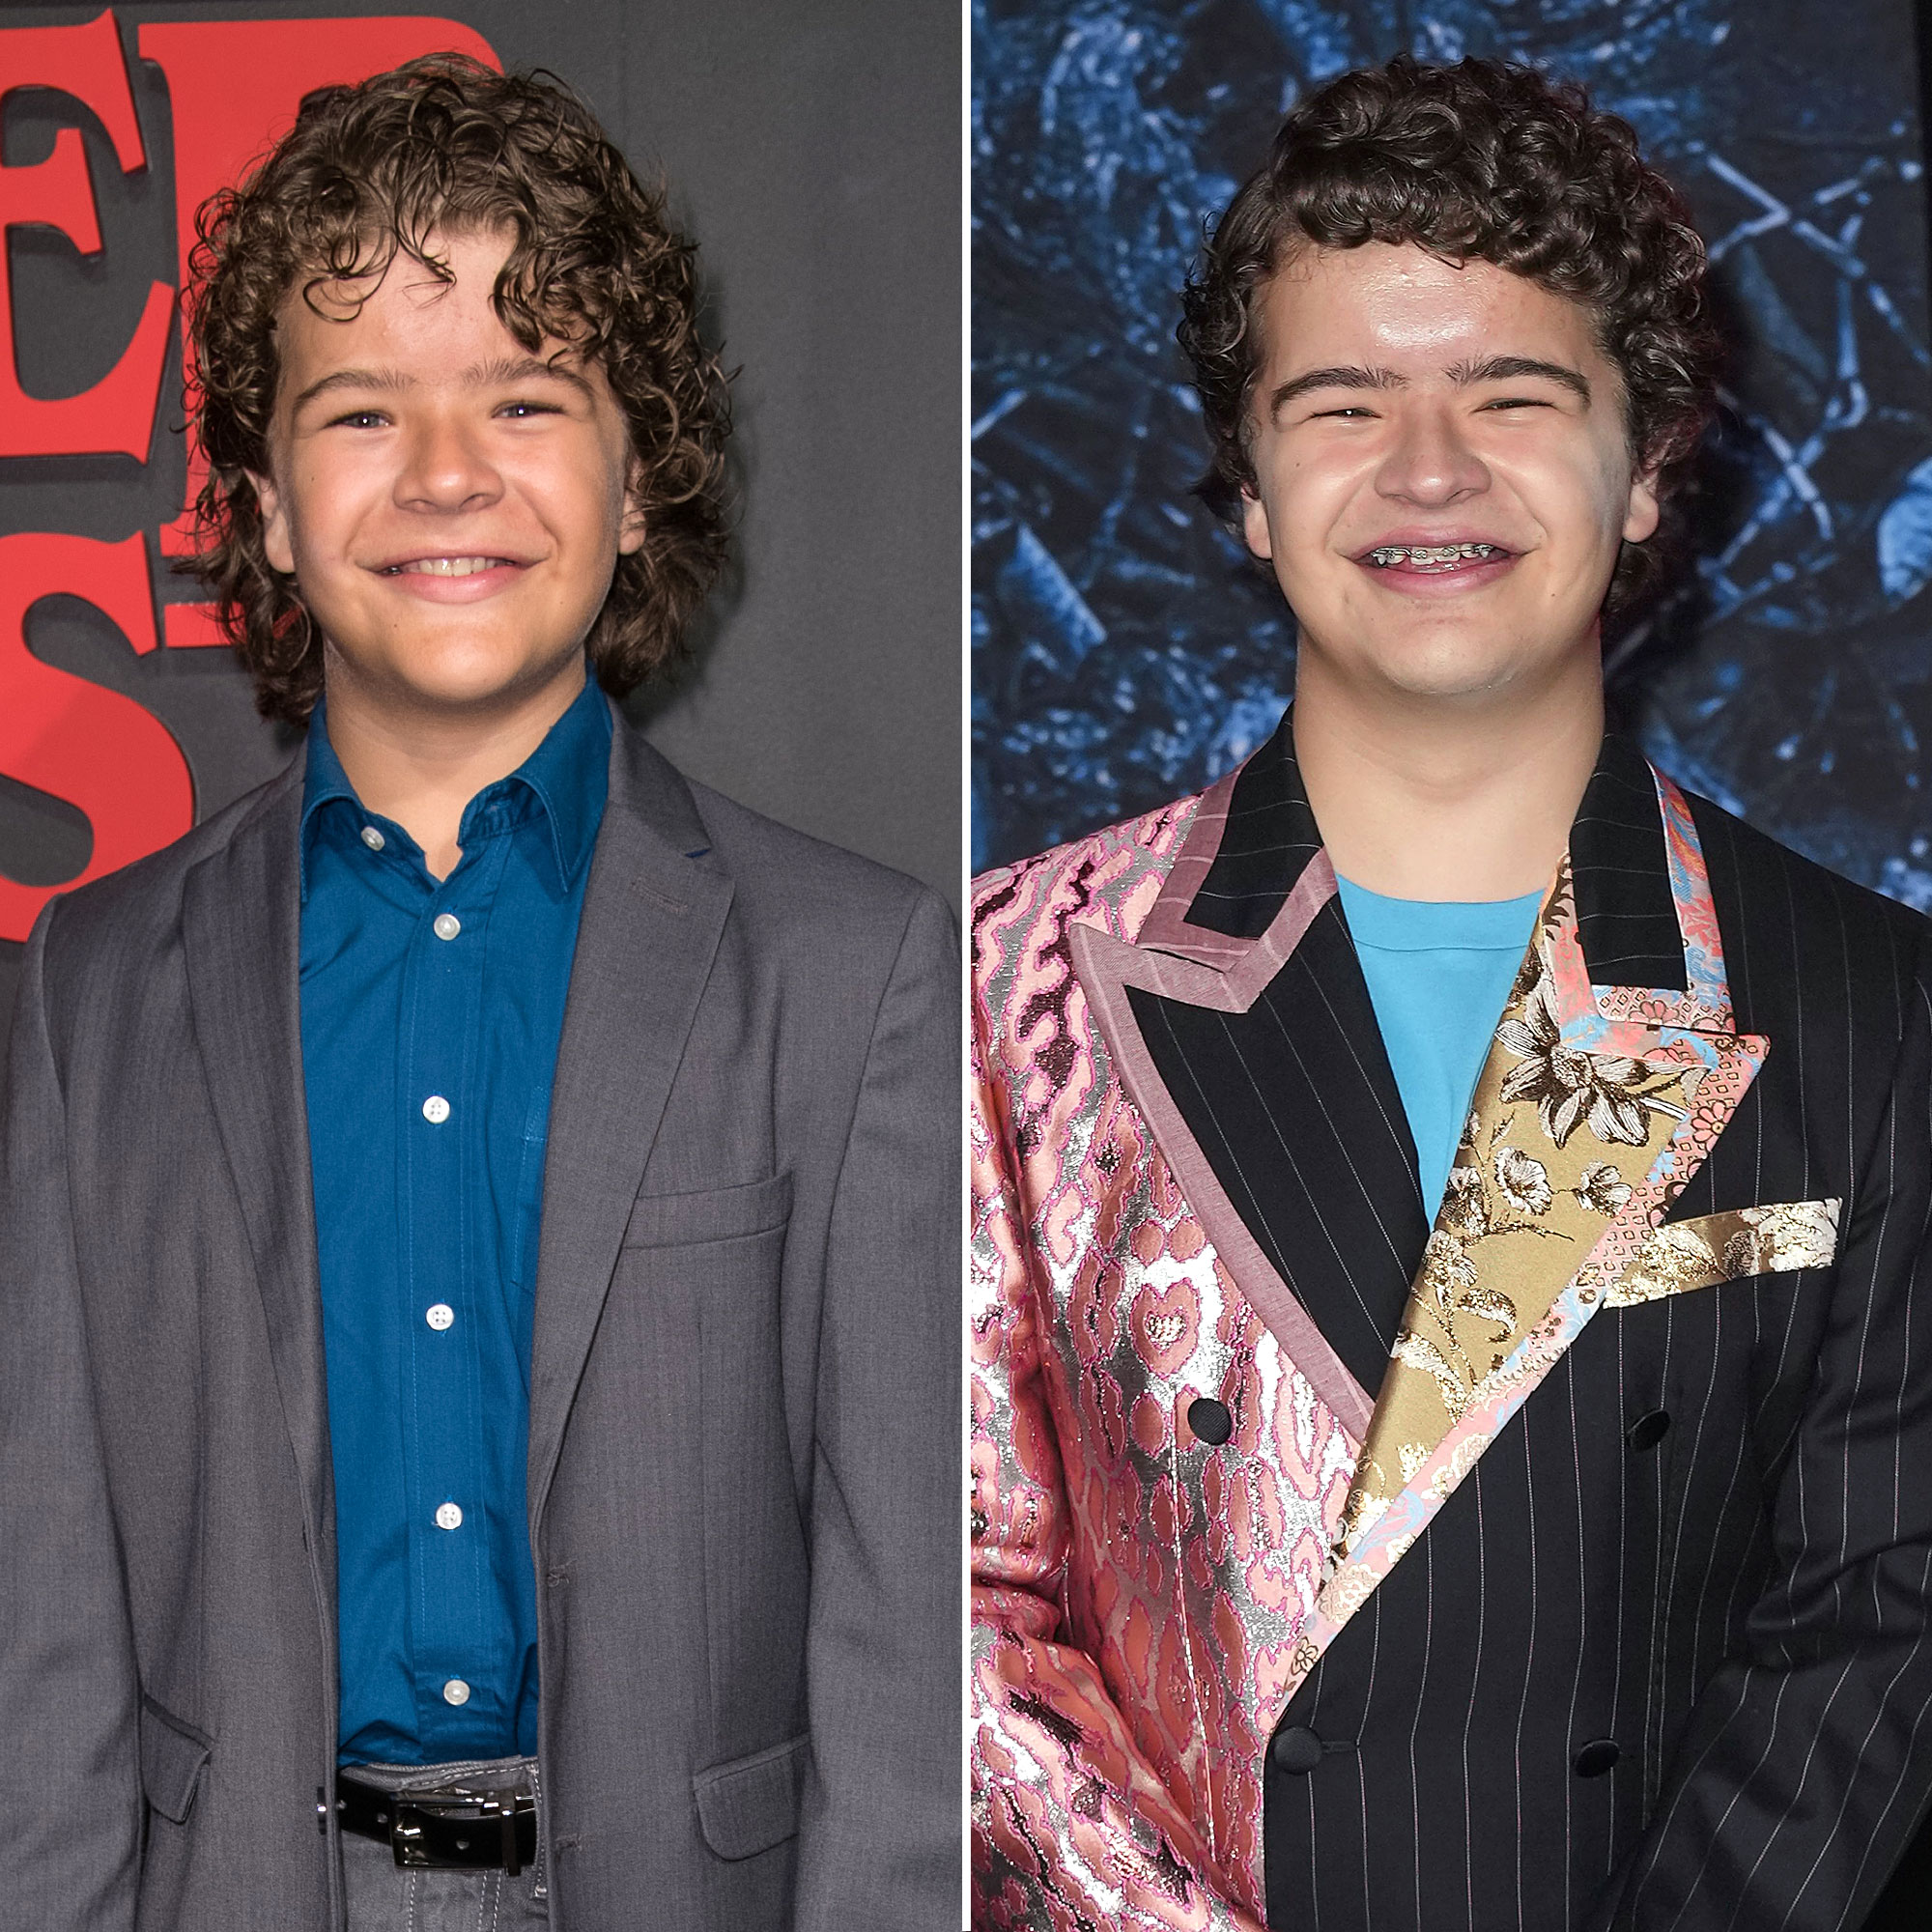 How Old Is The Cast Of Stranger Things In Season 3?